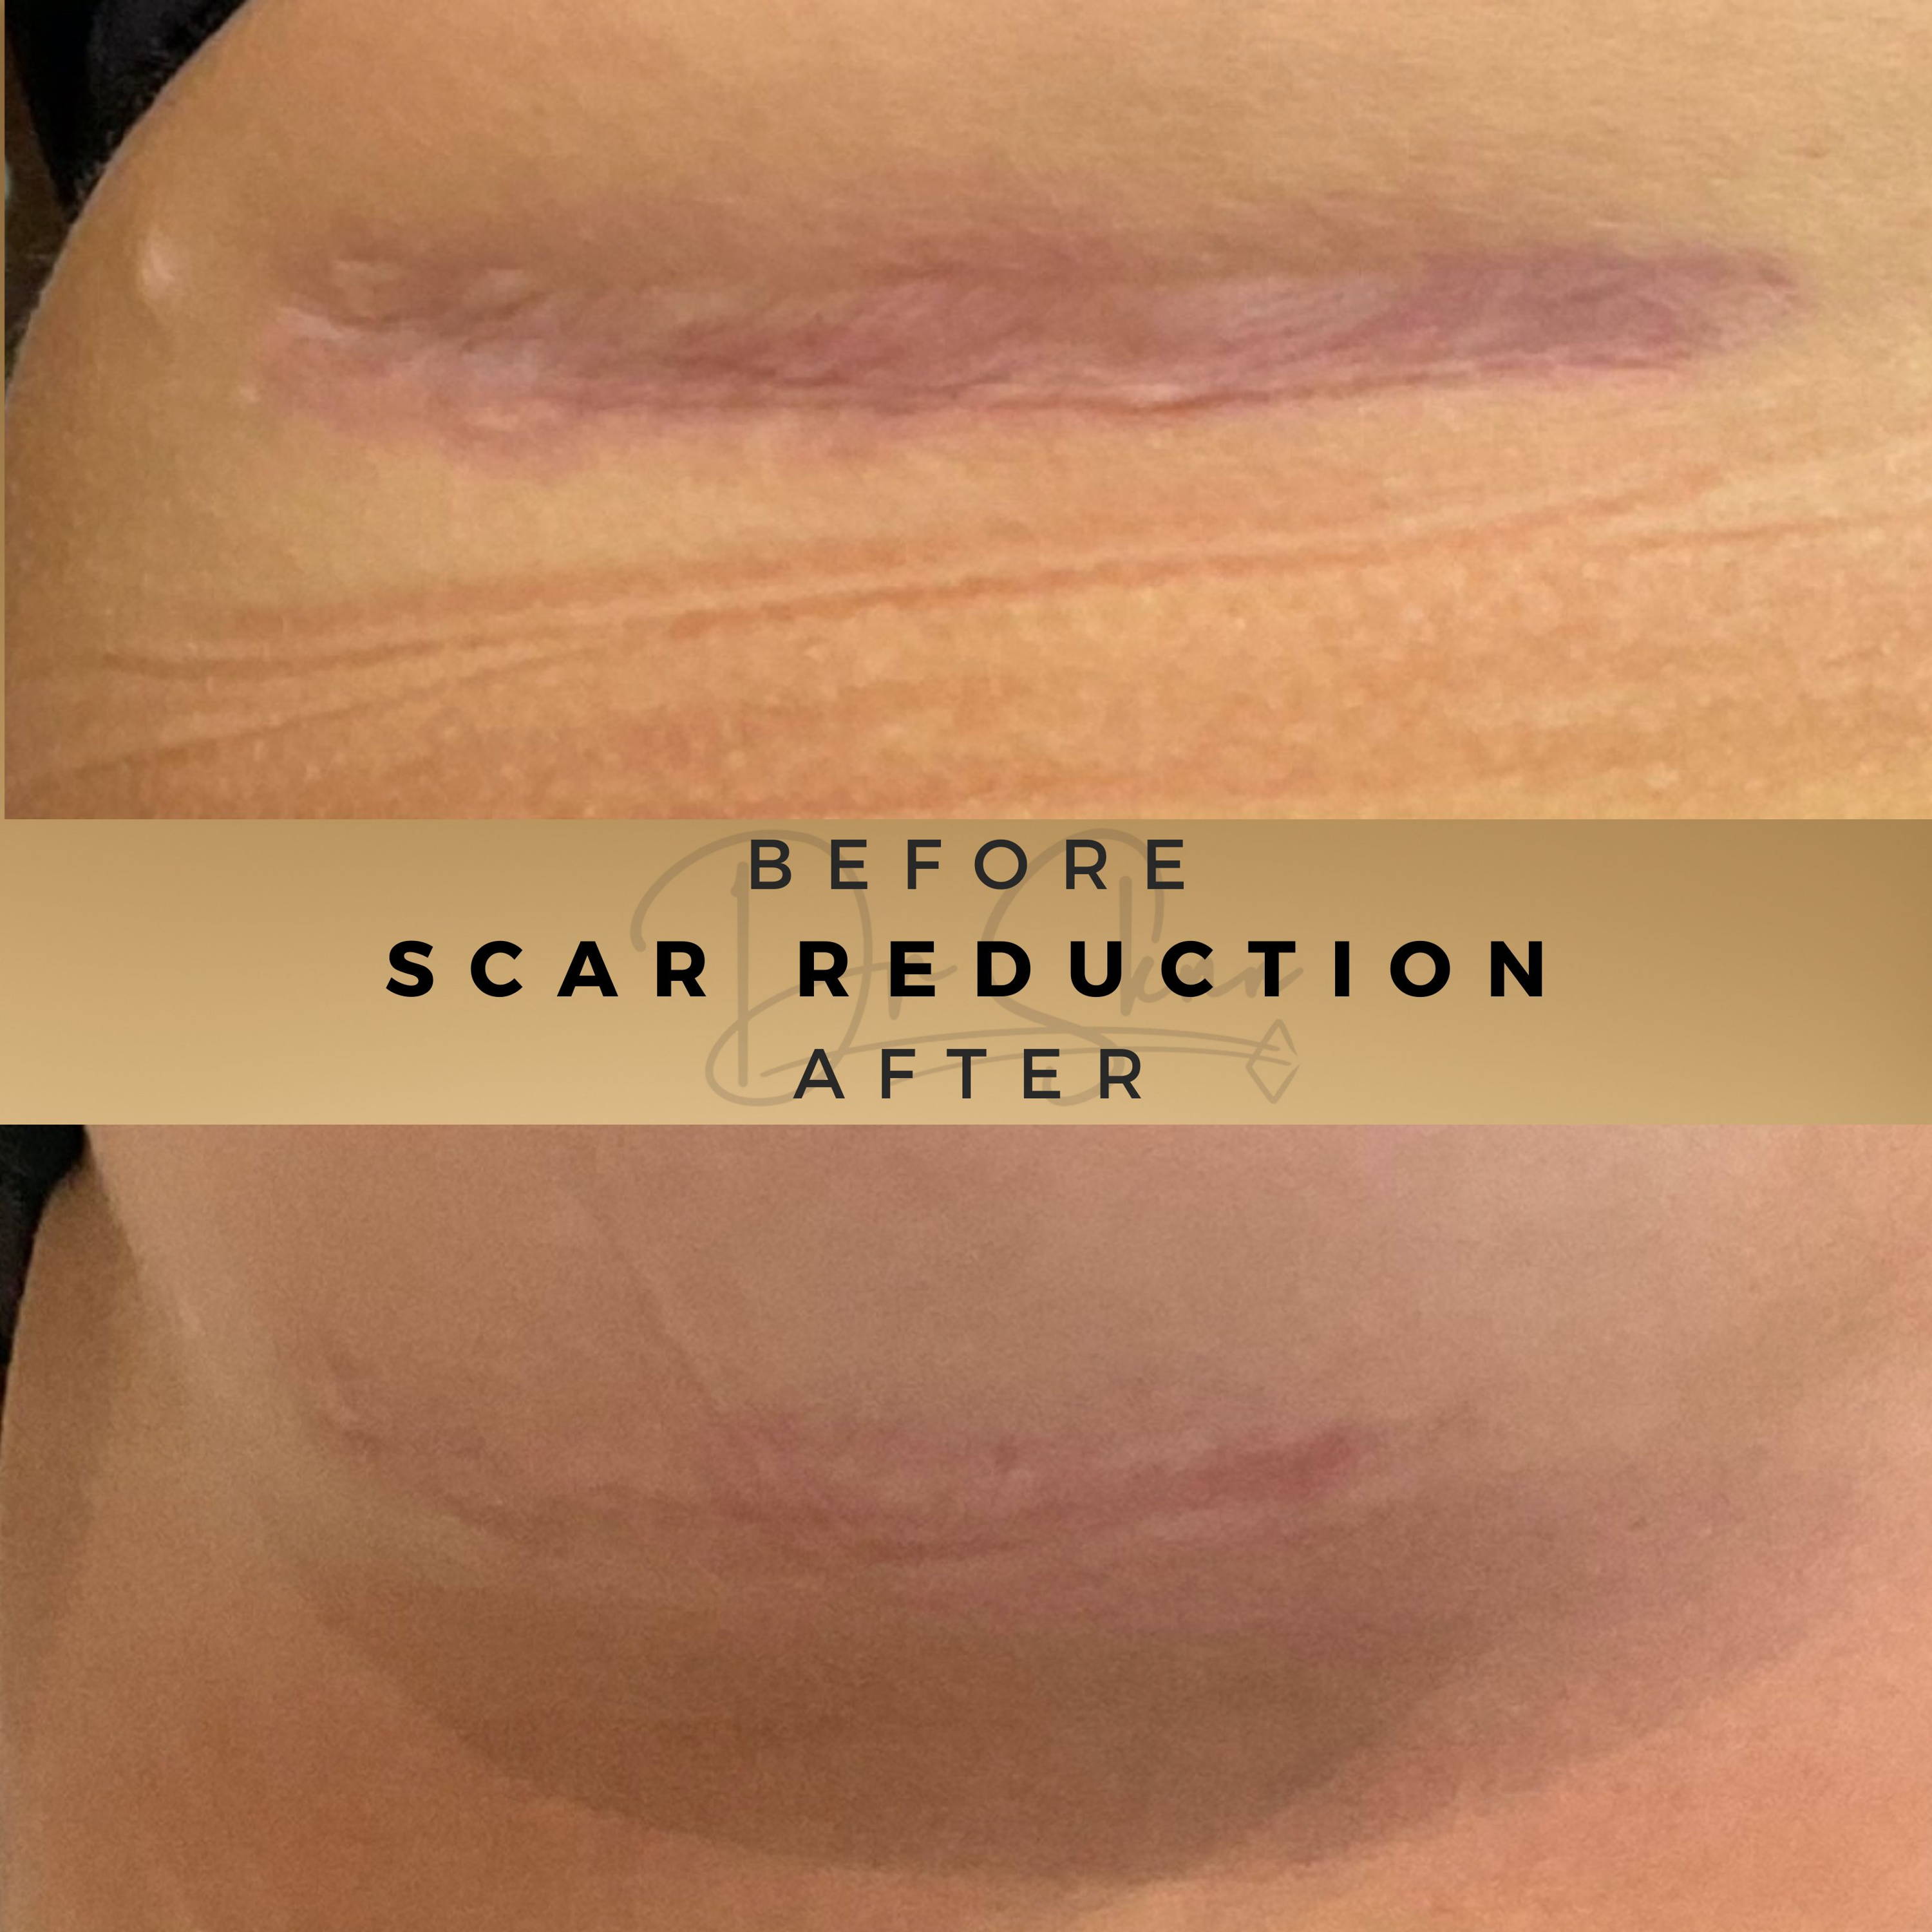 Scar Reduction Wilmslow - Breast Scar Reduction